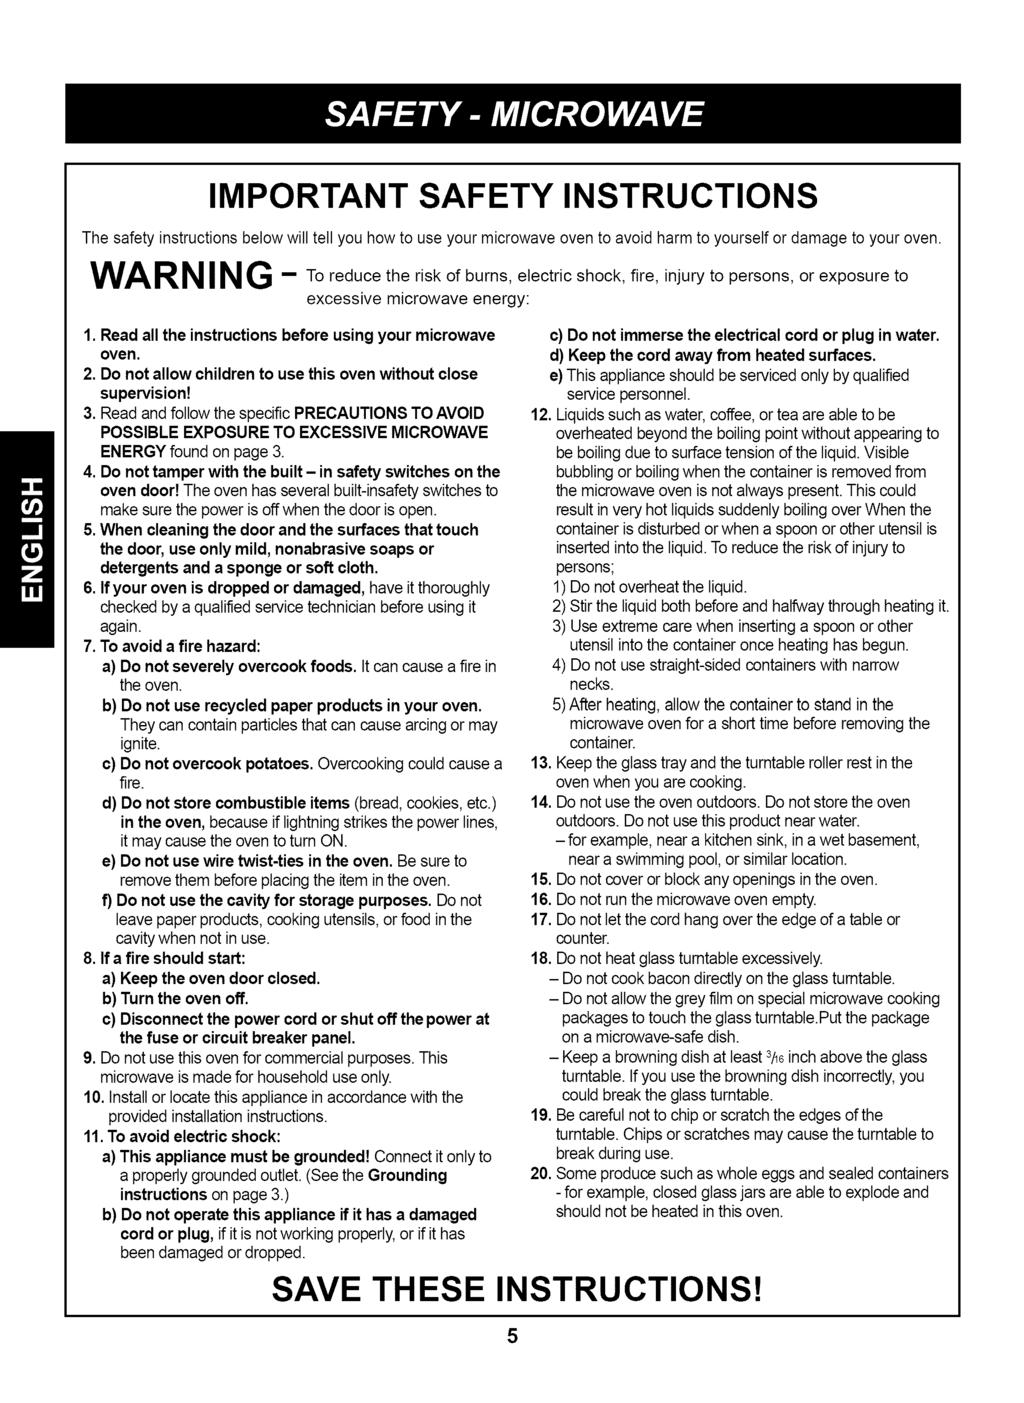 IMPORTANT SAFETY INSTRUCTIONS The safety instructions below will tell you how to use your microwave oven to avoid harm to yourself or damage to your oven.